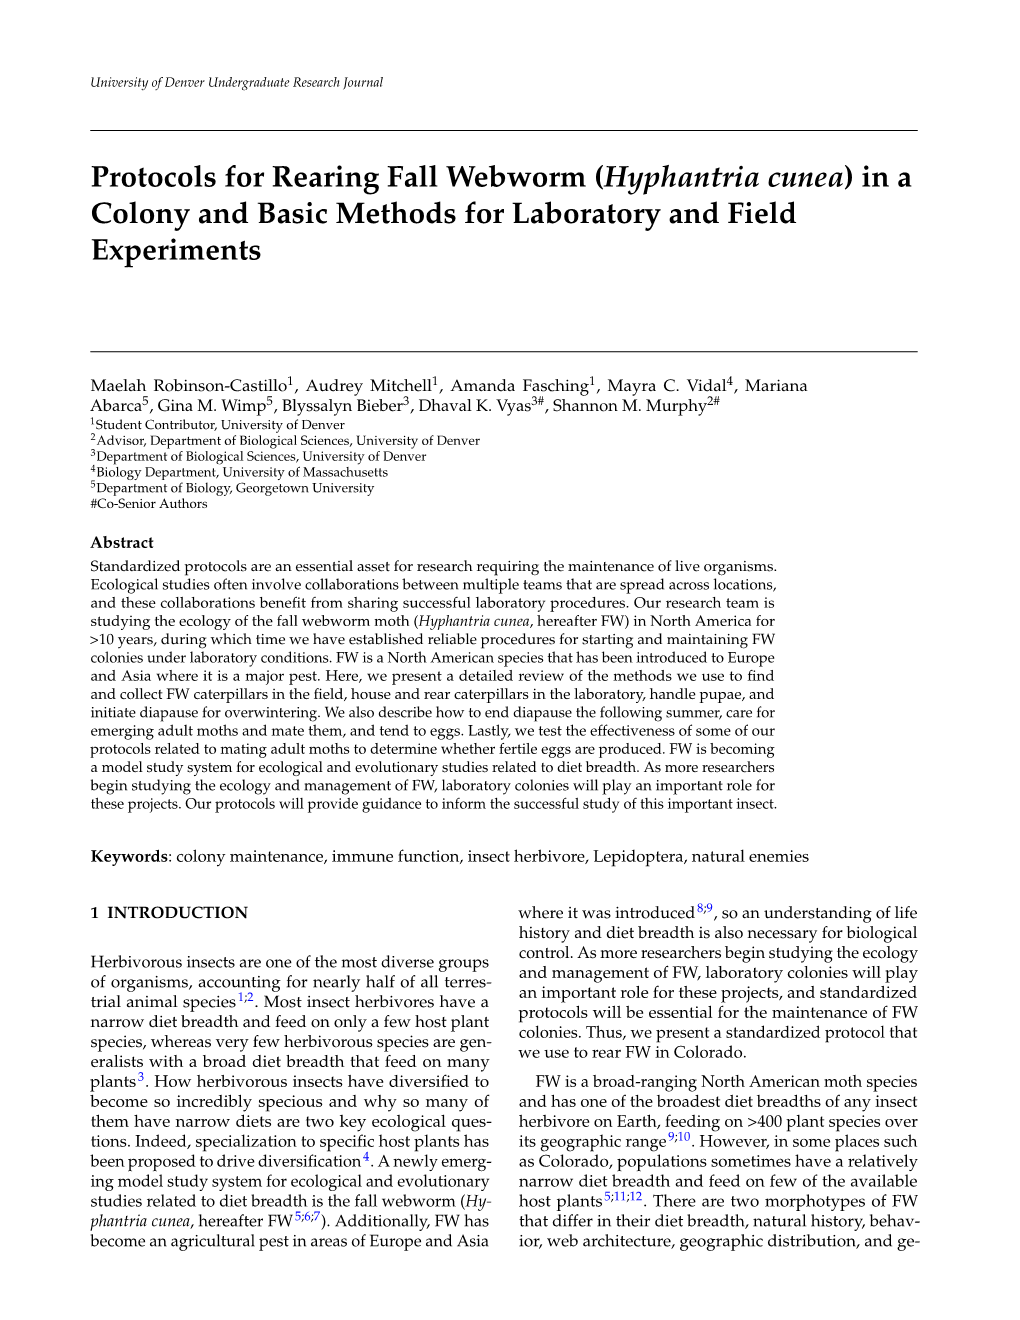 Protocols for Rearing Fall Webworm (Hyphantria Cunea) in a Colony and Basic Methods for Laboratory and Field Experiments